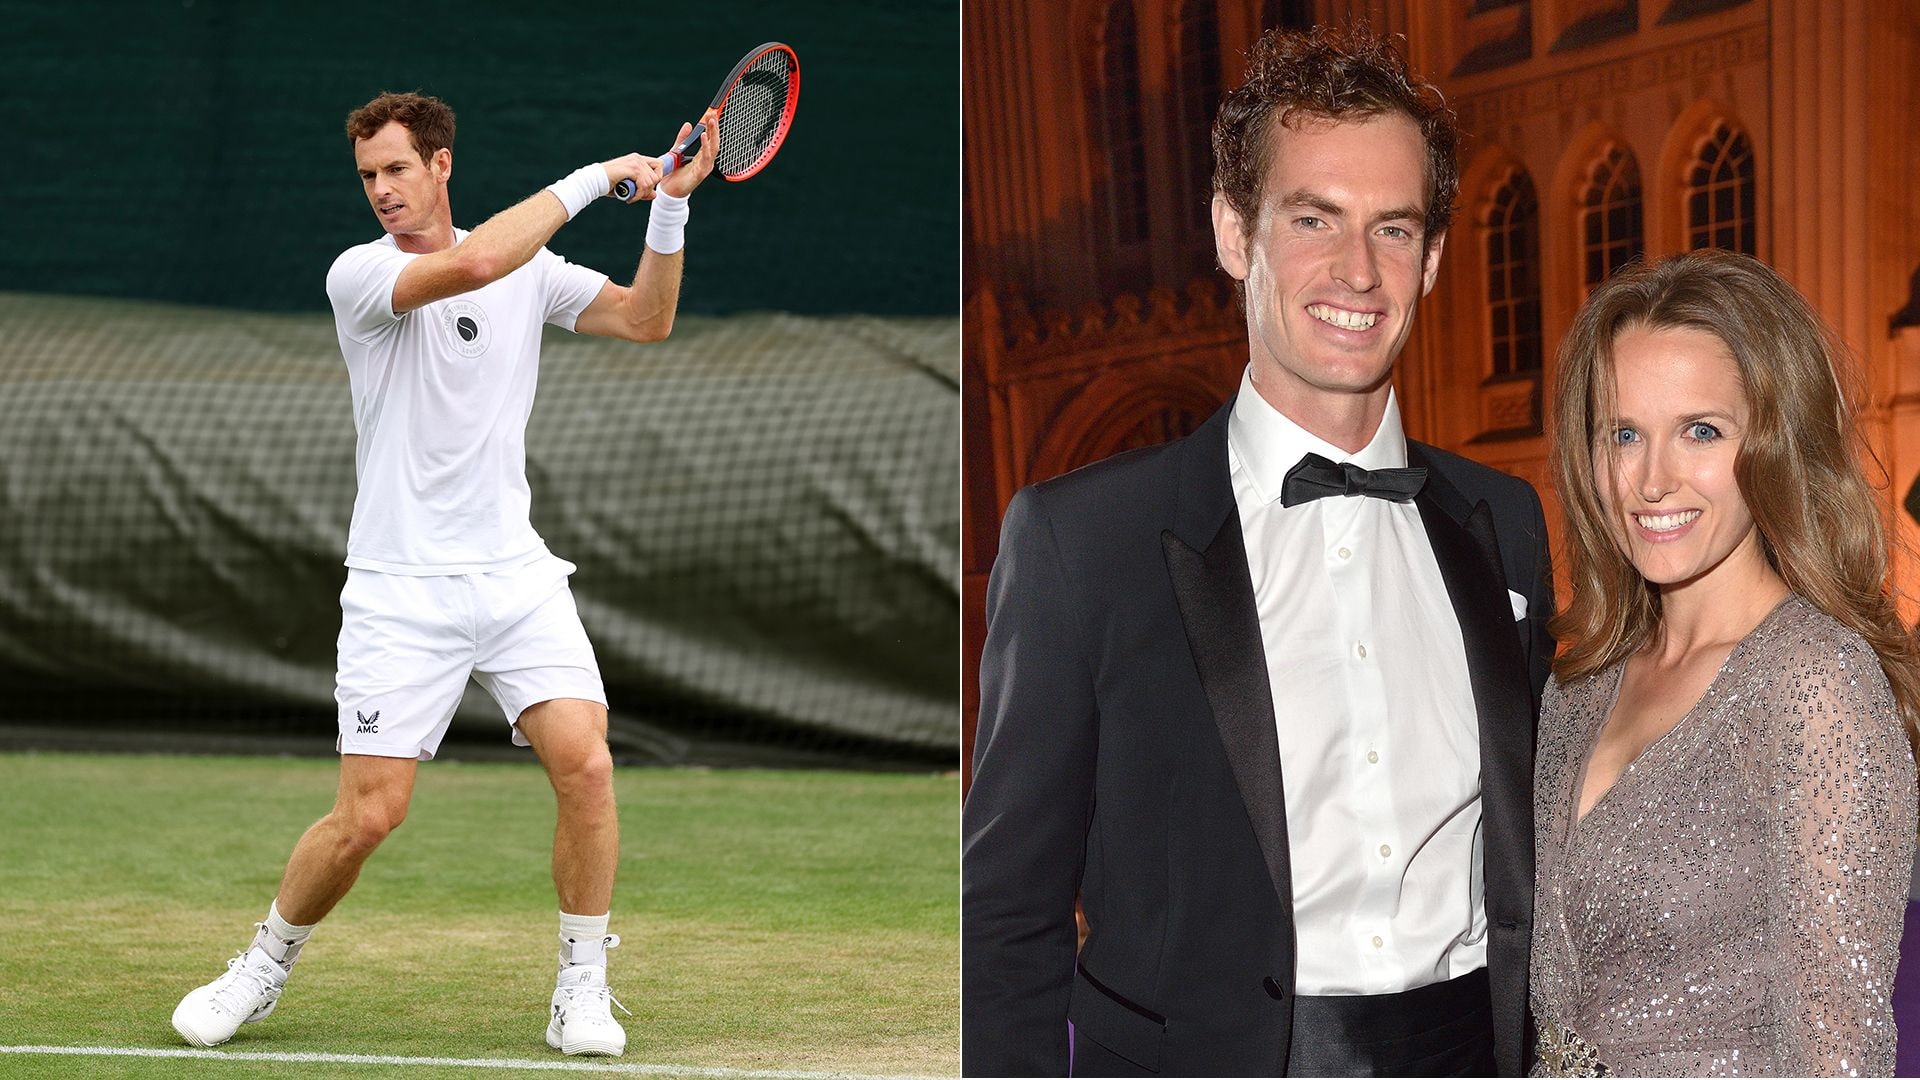 Andy Murrays private family life Meet the Wimbledon stars wife Kim Sears and children HELLO! image